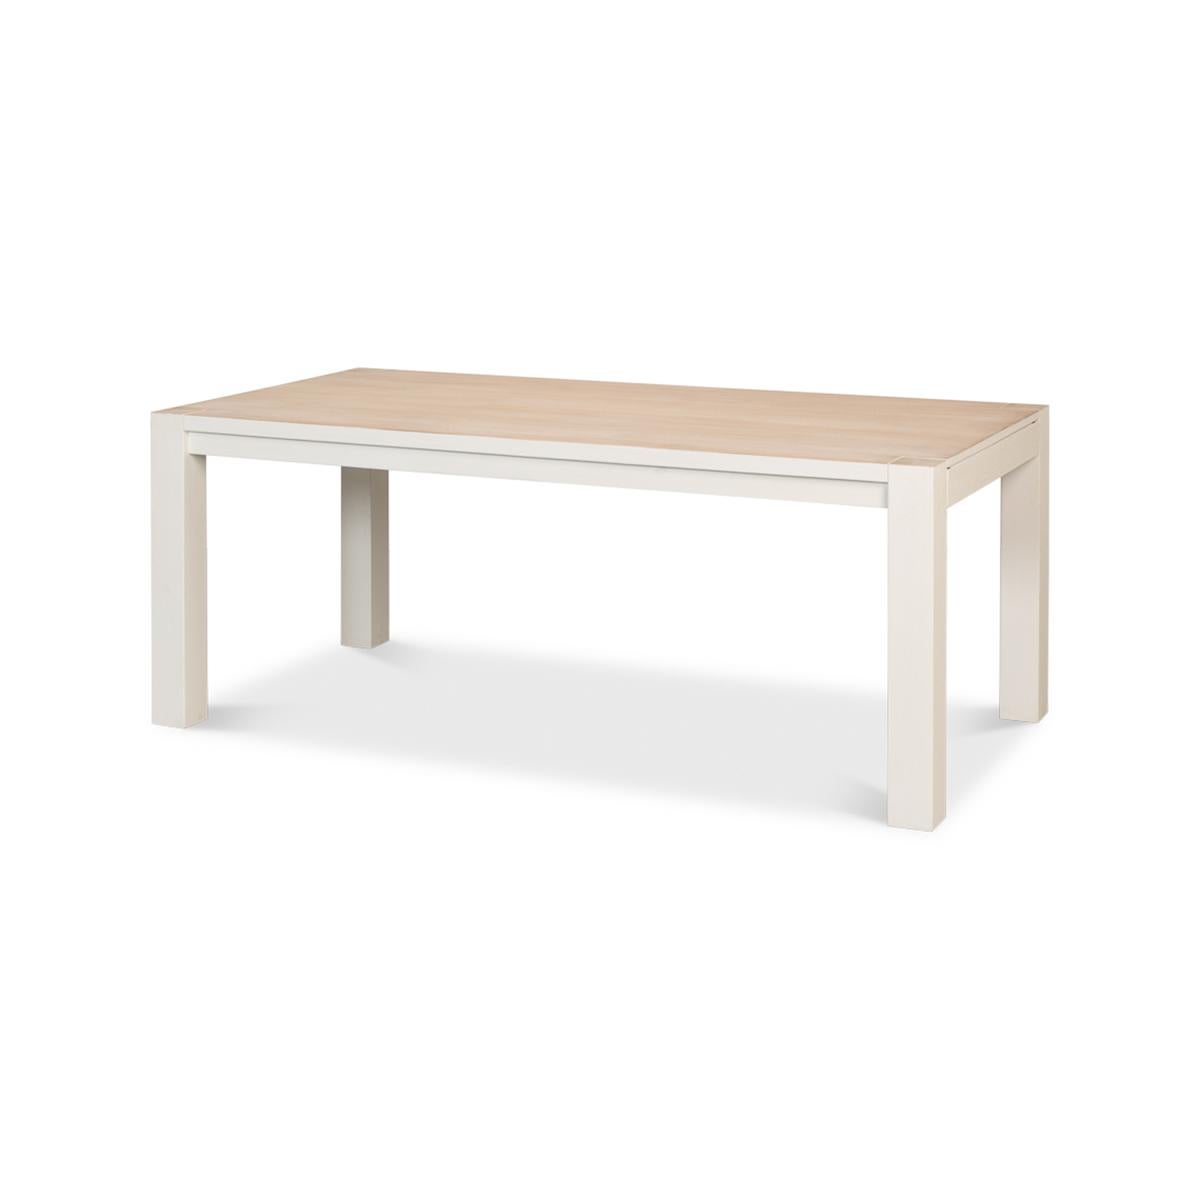 Modern extension dining table, constructed of historic reclaimed pine which has been reformatted into its contemporary expression as a highly functional extension dining table, a perfect balance between old and new. With self-storing leaves, the